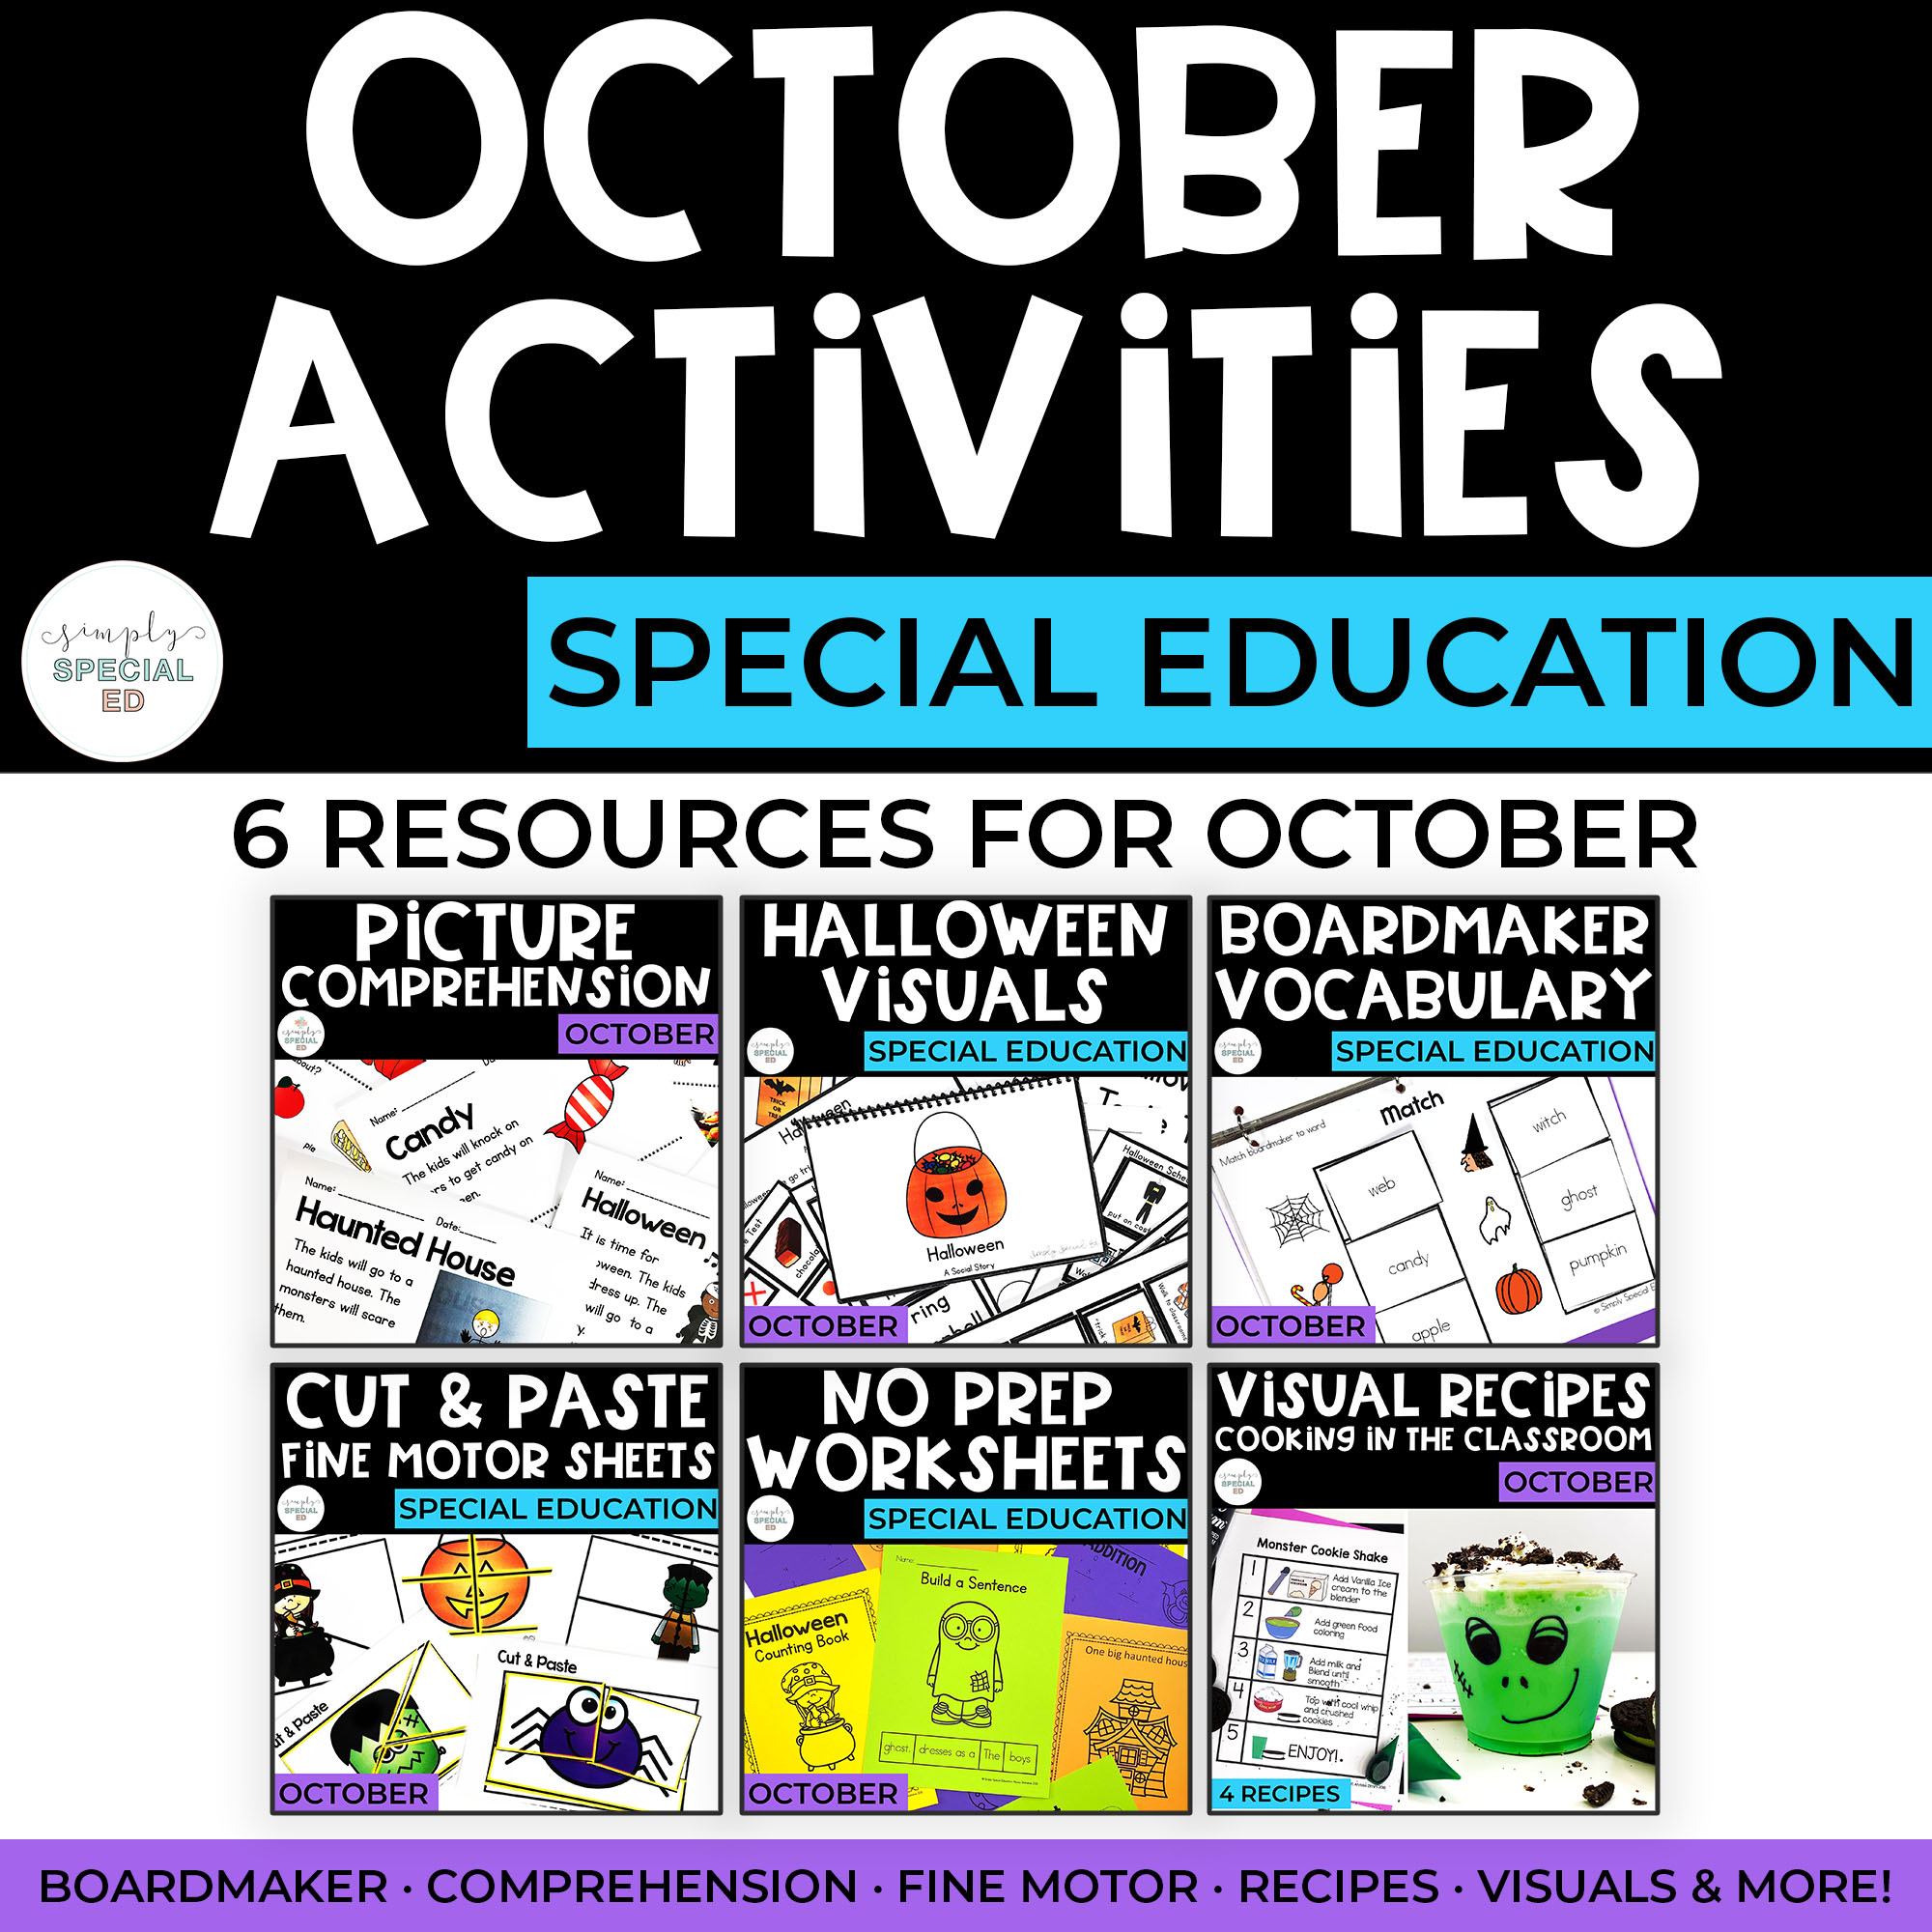 Halloween themed resources keep students engaged. Read on to learn about my favorite adapted Halloween Activities for special education.